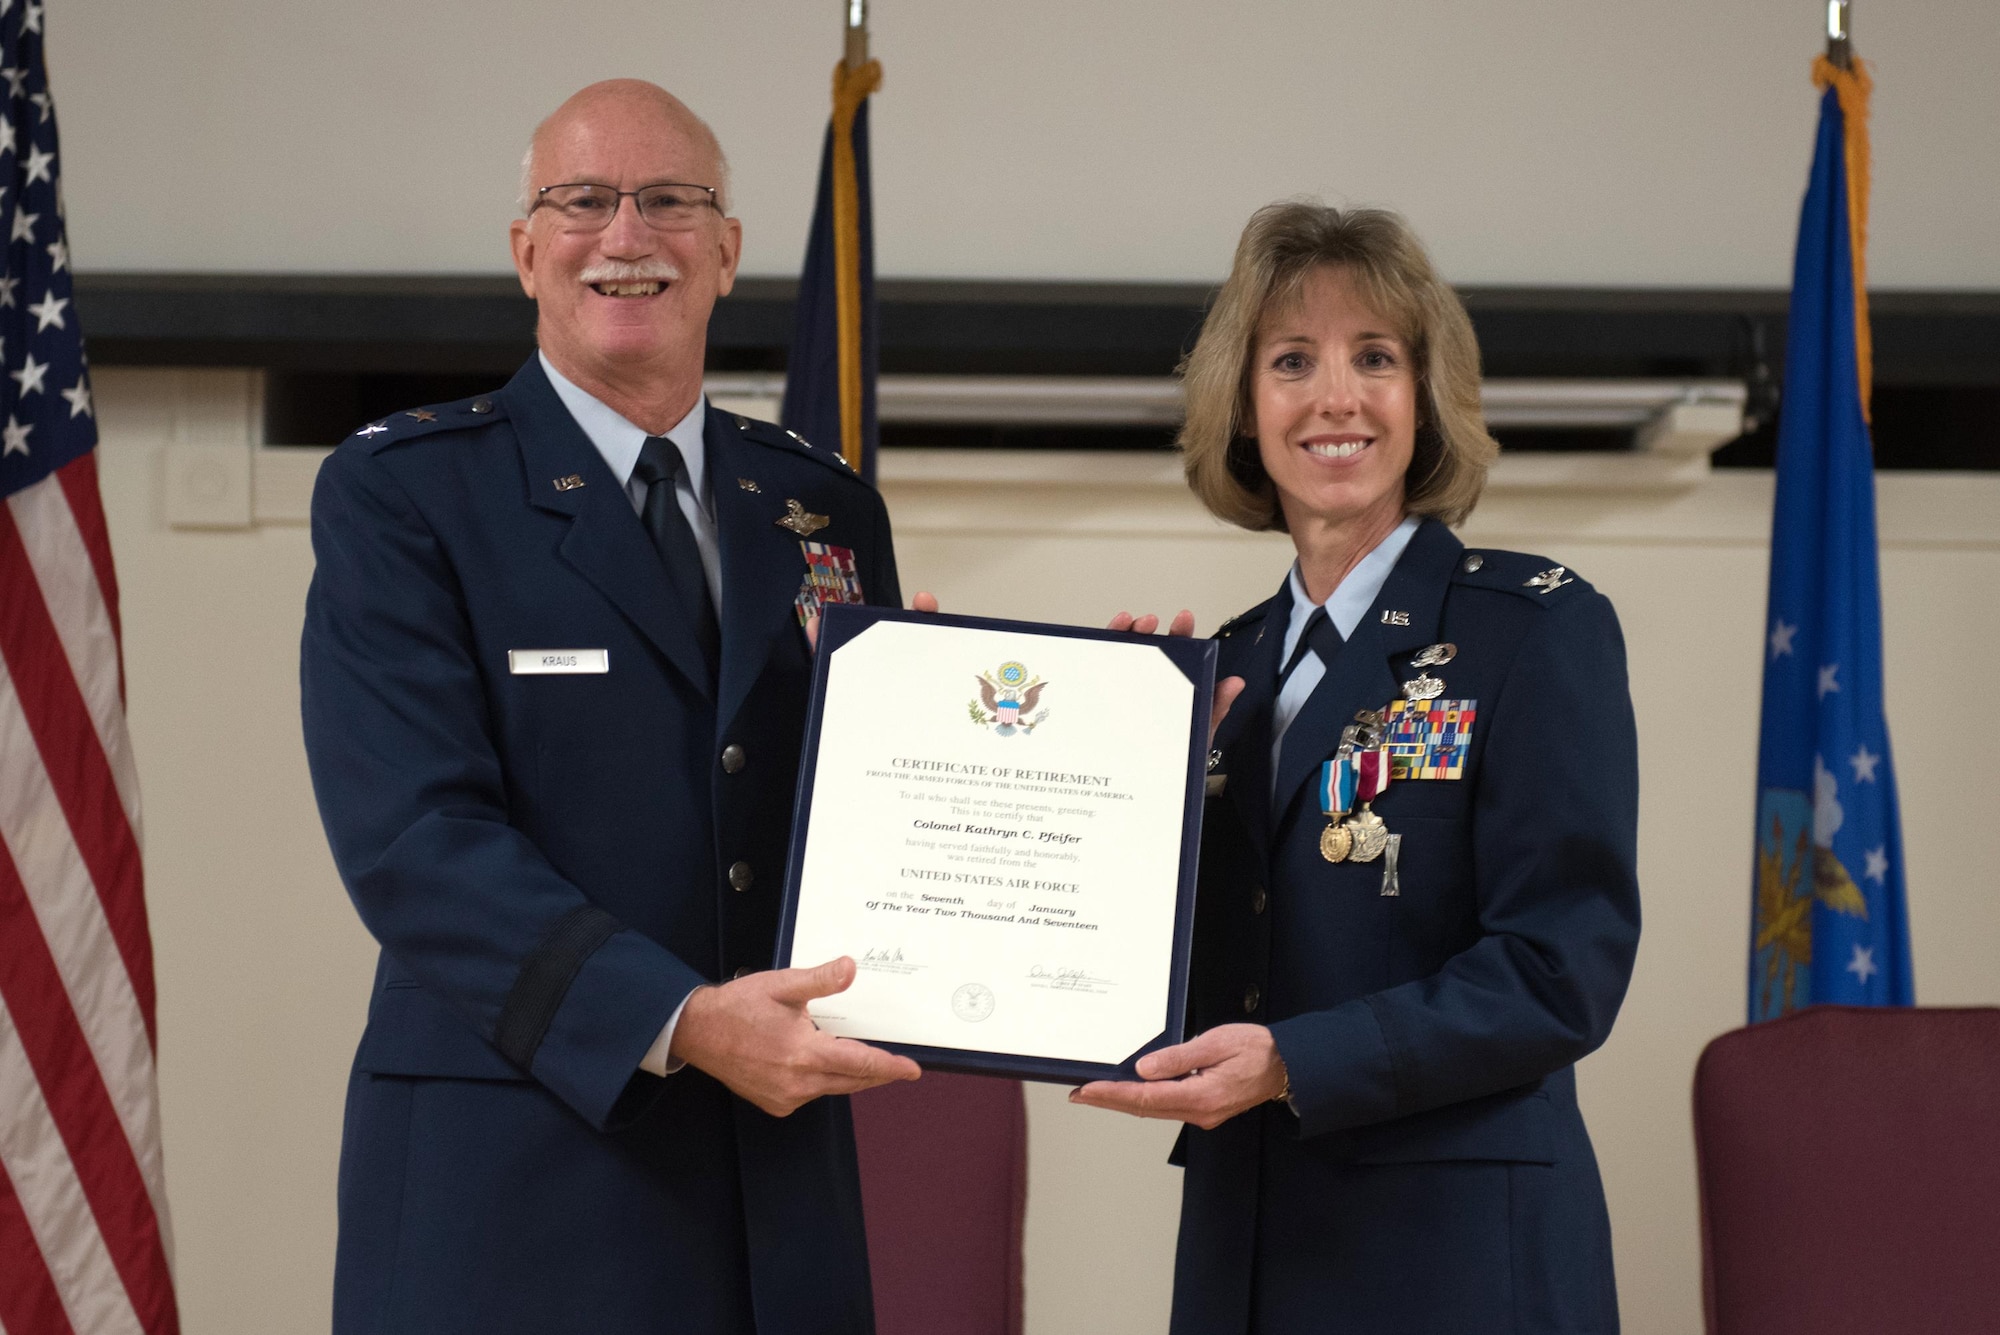 Col. Kathryn Pfeifer (right), outgoing commander of the 123rd Mission Support Group, receives her Certificate of Retirement from retired Maj. Gen. Mark Kraus, former Air National Guard assistant to the commander, United States Air Forces Central and a former assistant adjutant general for Air, Kentucky National Guard, during a ceremony held in Pfeifer’s honor at the Kentucky Air National Guard Base in Louisville, Ky., Jan. 7, 2017. Pfeifer is retiring after more than 28 years of service. (U.S. Air National Guard photo by Staff Sgt. Joshua Horton)